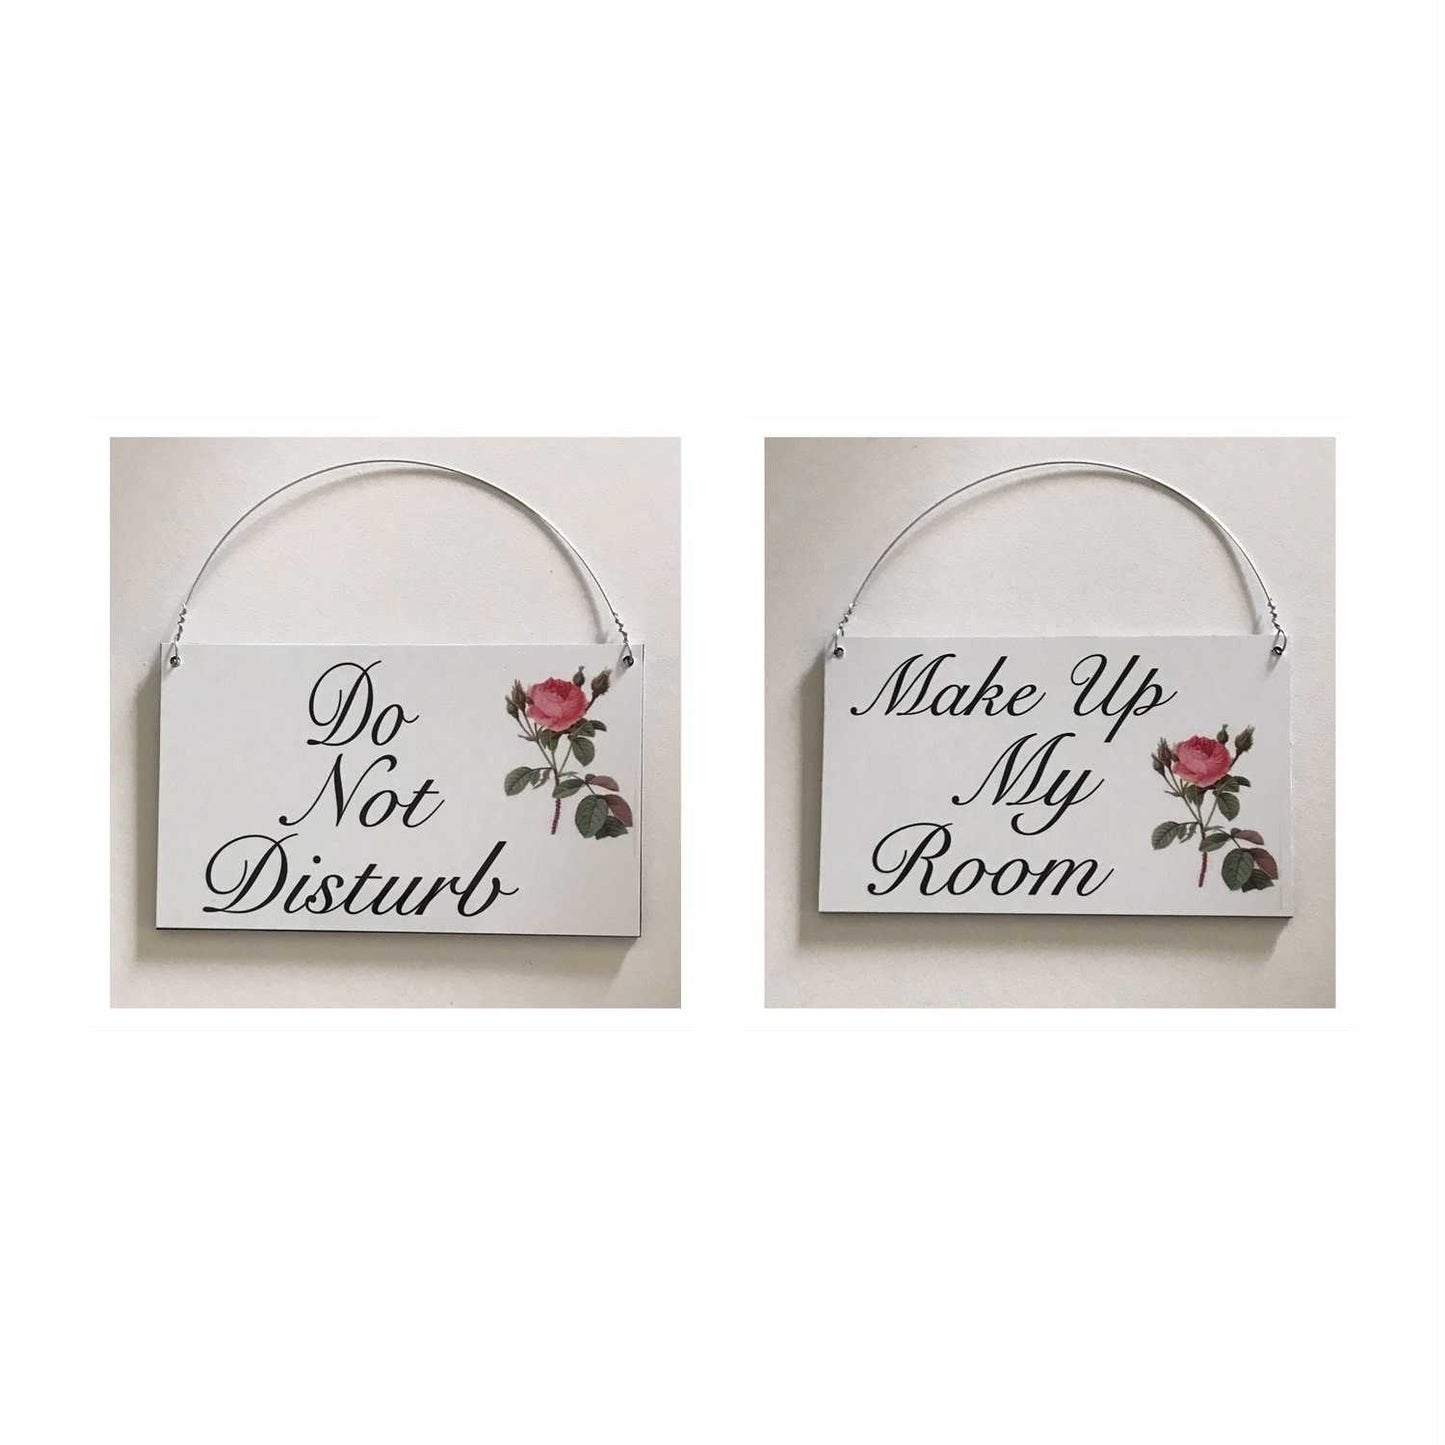 Do Not Disturb Make Up My Room Sign Wall Plaque or Hanging Hotel Motel BNB Room